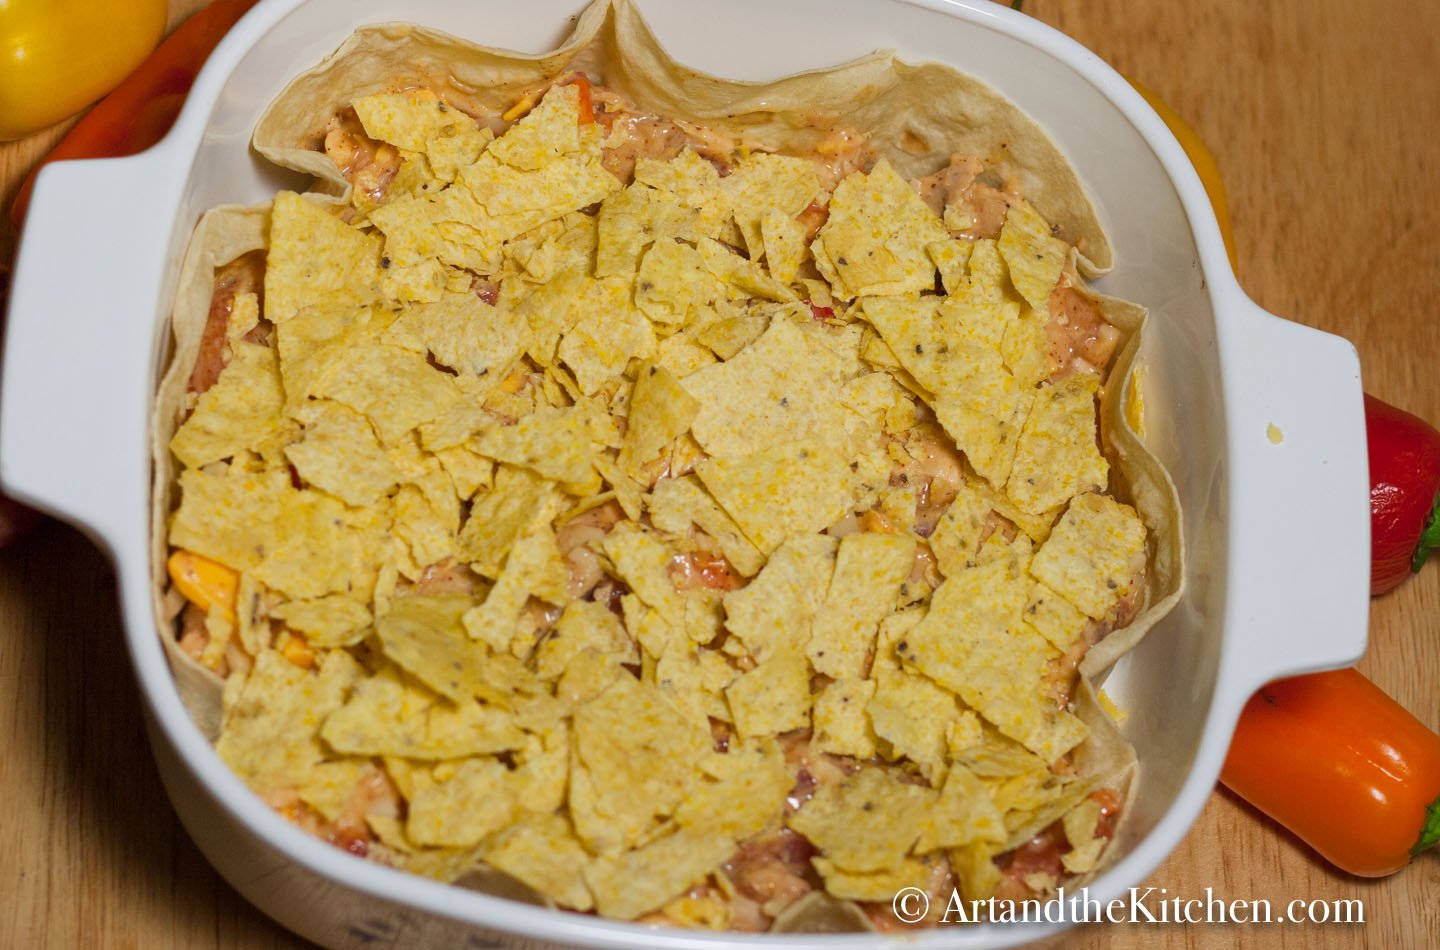 Square casserole dish with layers of unbaked tortillas, turkey mixture and topped with crushed tortilla chips.